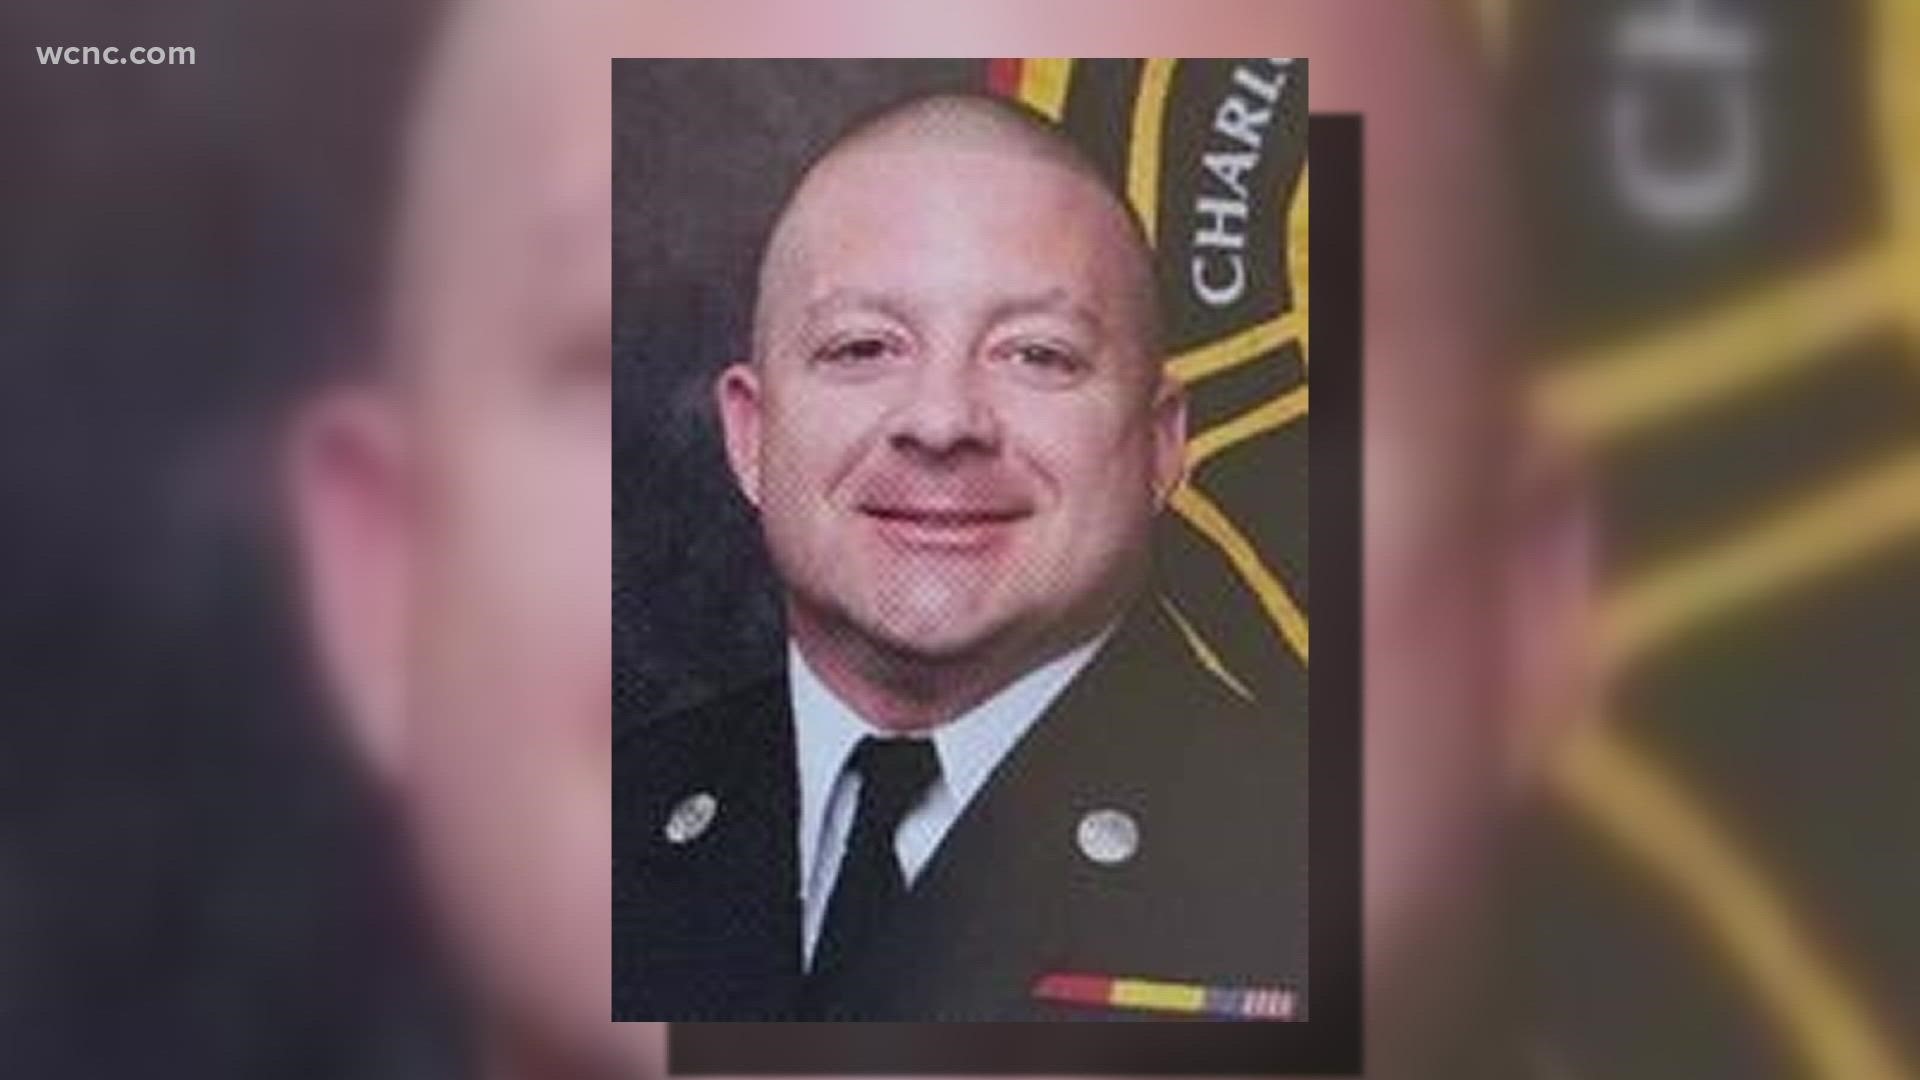 Firefighter Jeff Hager passed away after a battle with COVID-19. He served the Charlotte fire department for 23 years and the Huntersville fire department for eight.